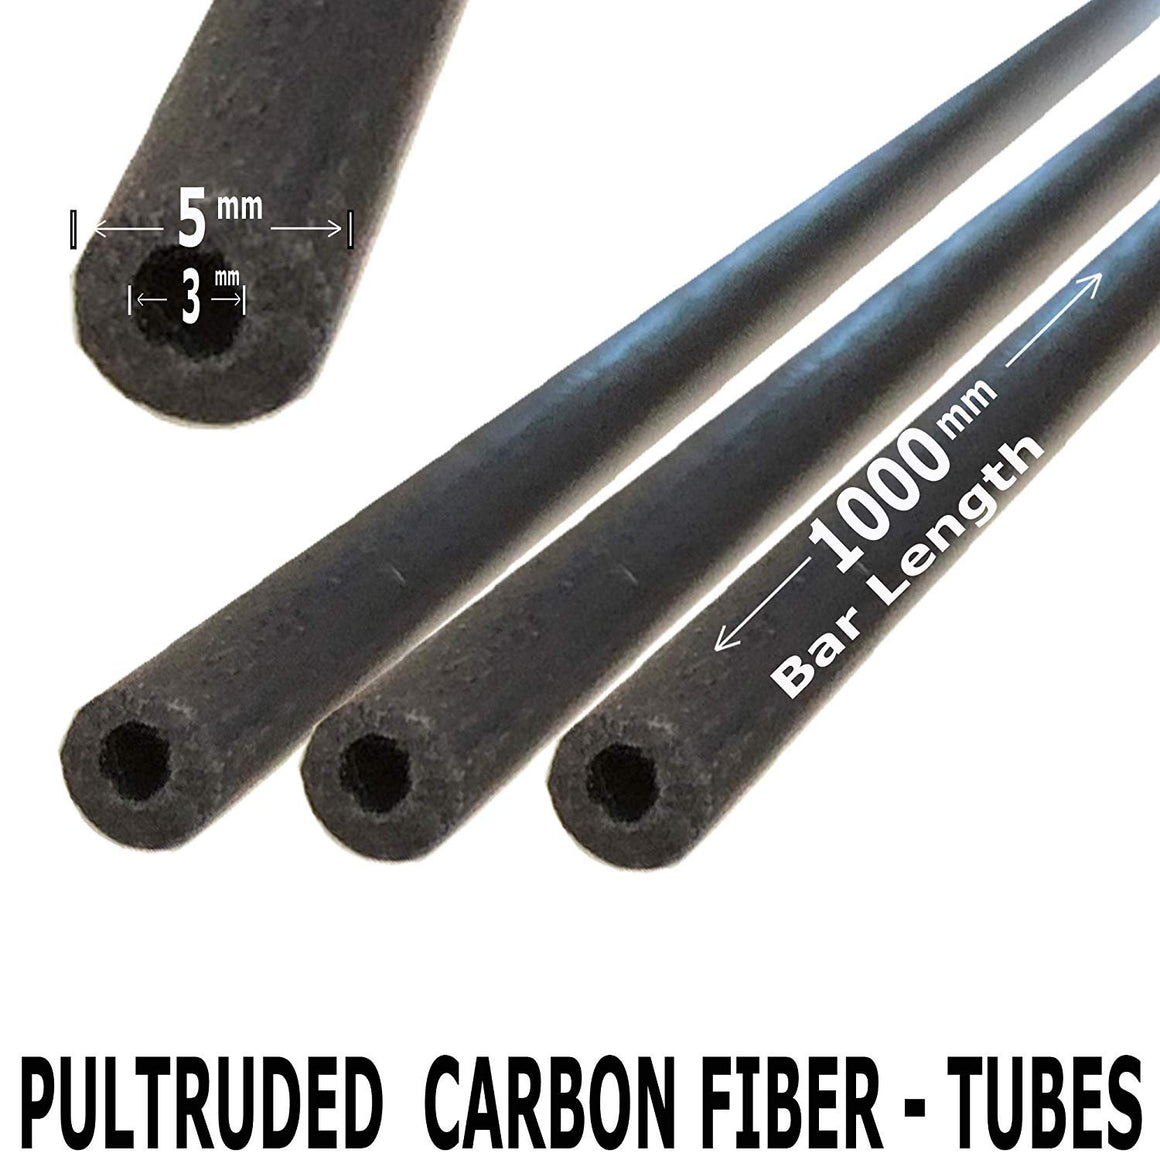 (1) Piece - 5mm x 3mm x 1000mm Carbon Fiber Tube - Pultruded Round Tube. Super High Strength for RC Hobbies, Drones, Special Projects